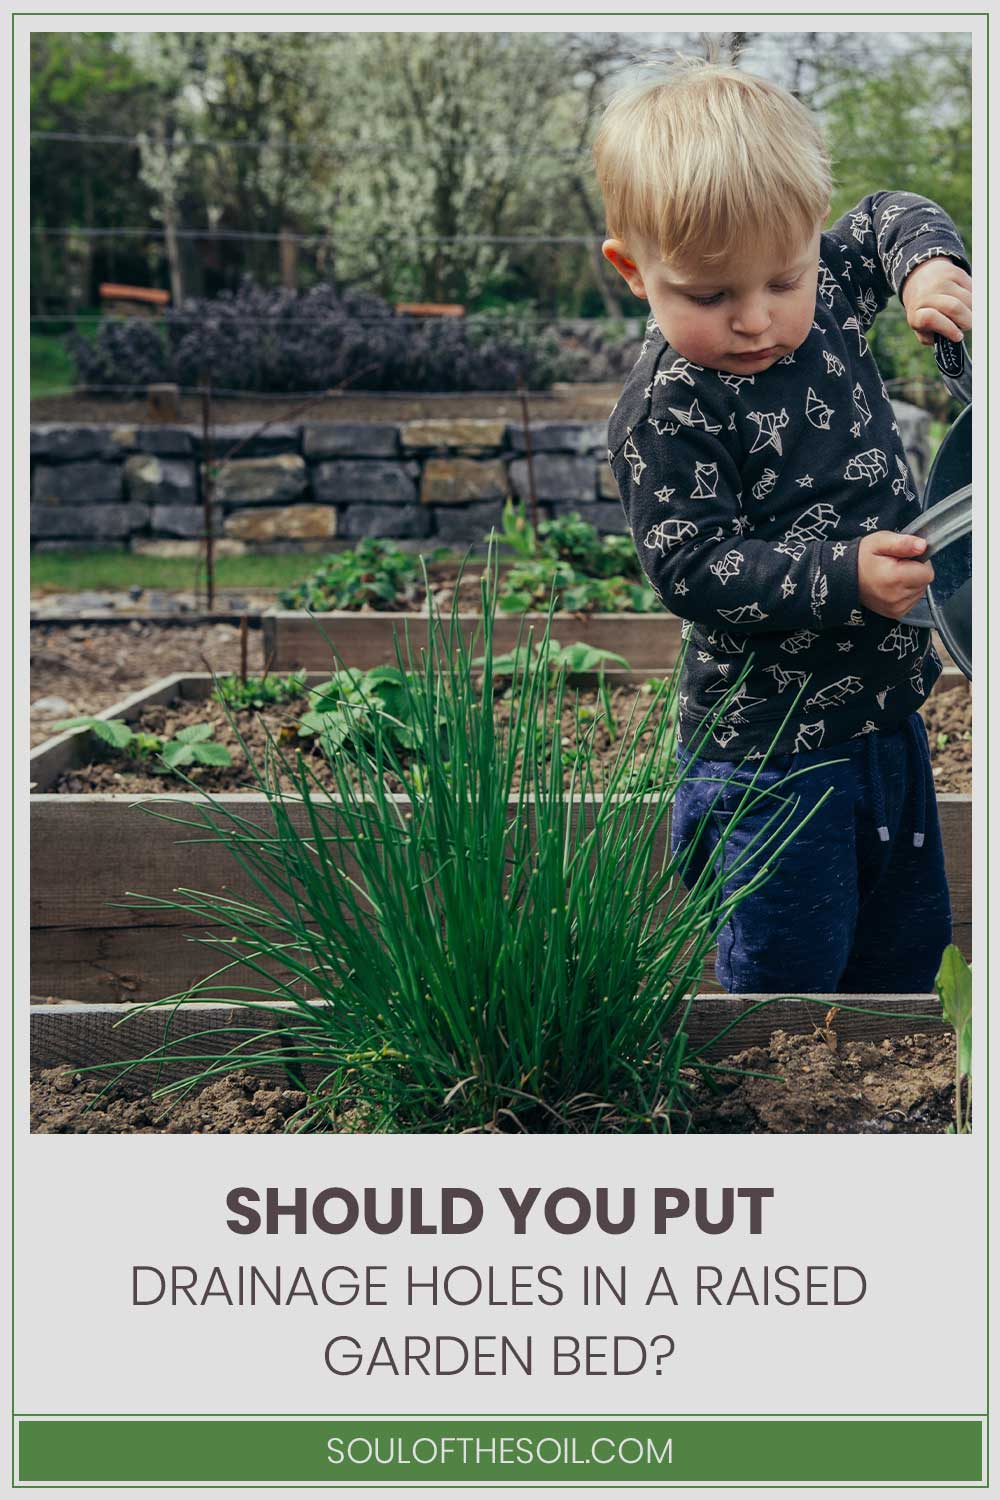 Little boy watering on plants - Should You Put Drainage Holes In A Raised Garden Bed?